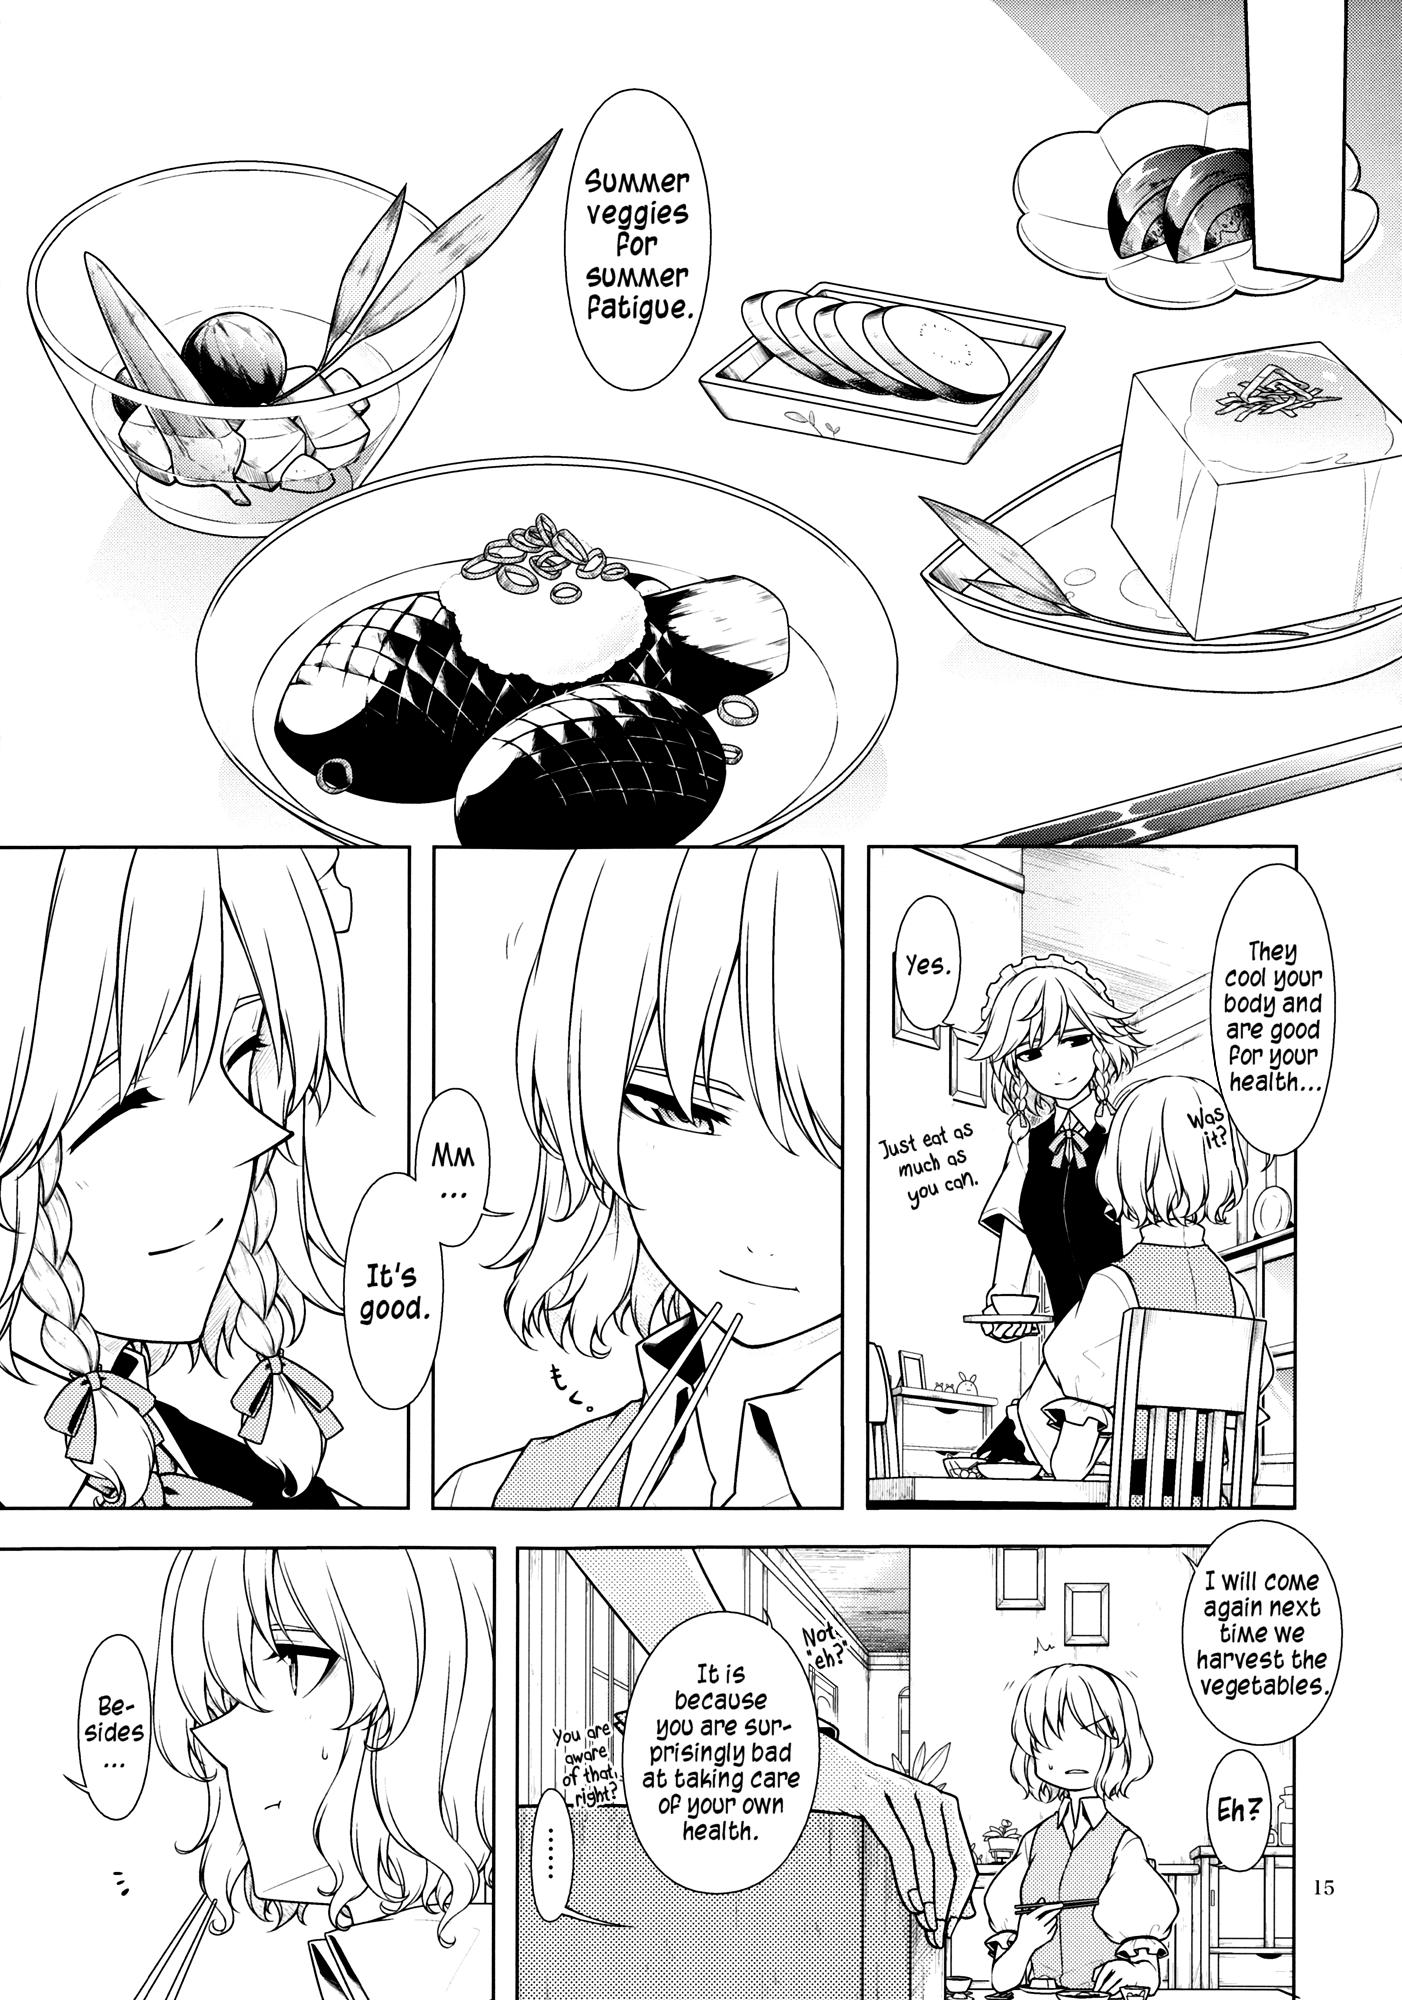 Touhou - Recovering from Summer Fatigue with a Maid (Doujinshi) - episode 2 - 4